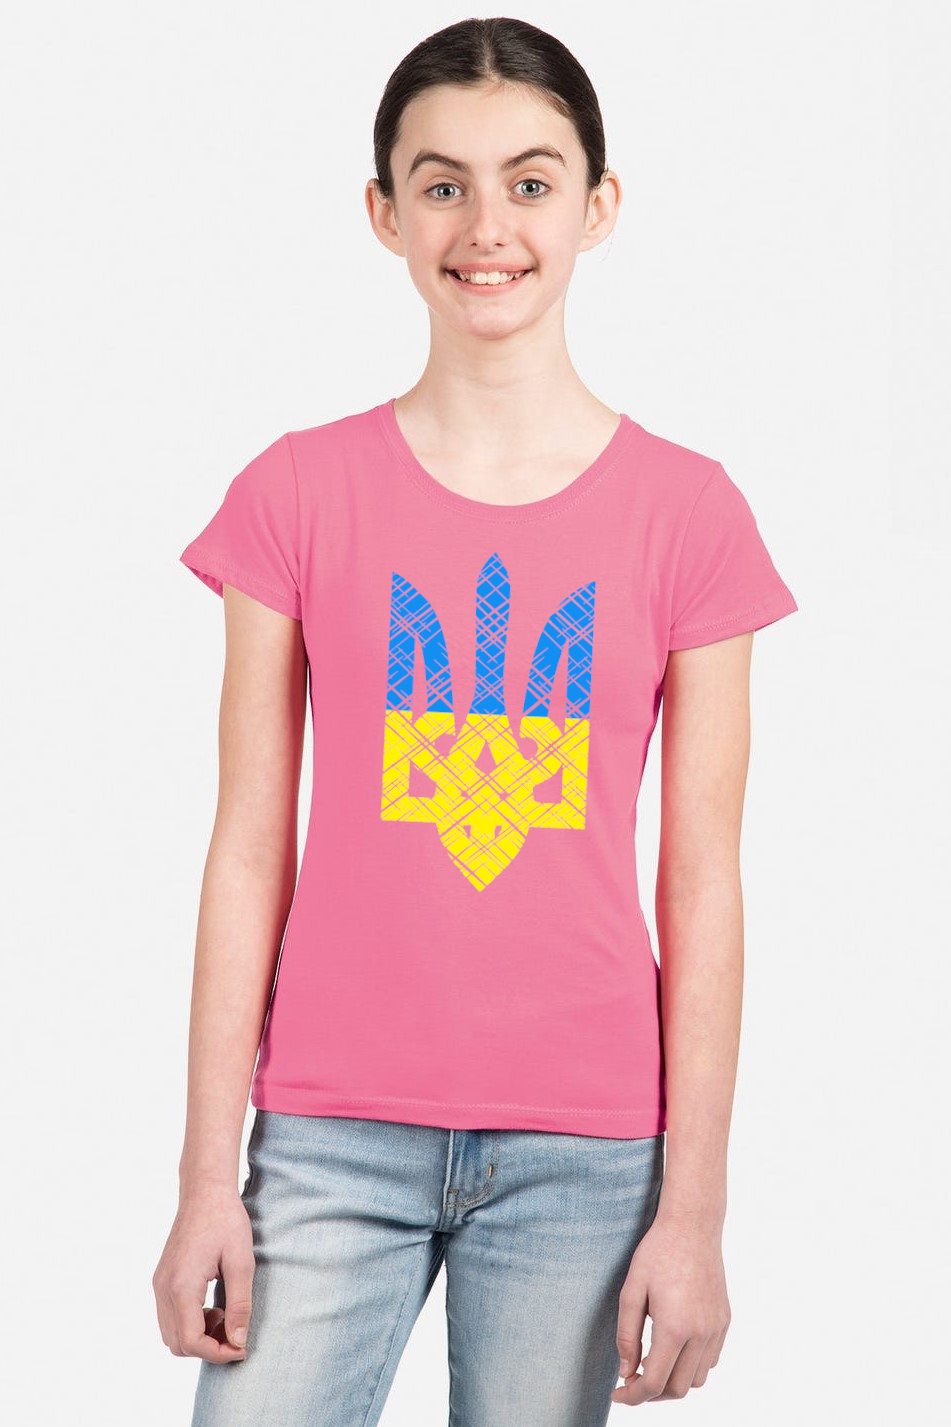 Girl's t-shirt "Blue and yellow Trident"